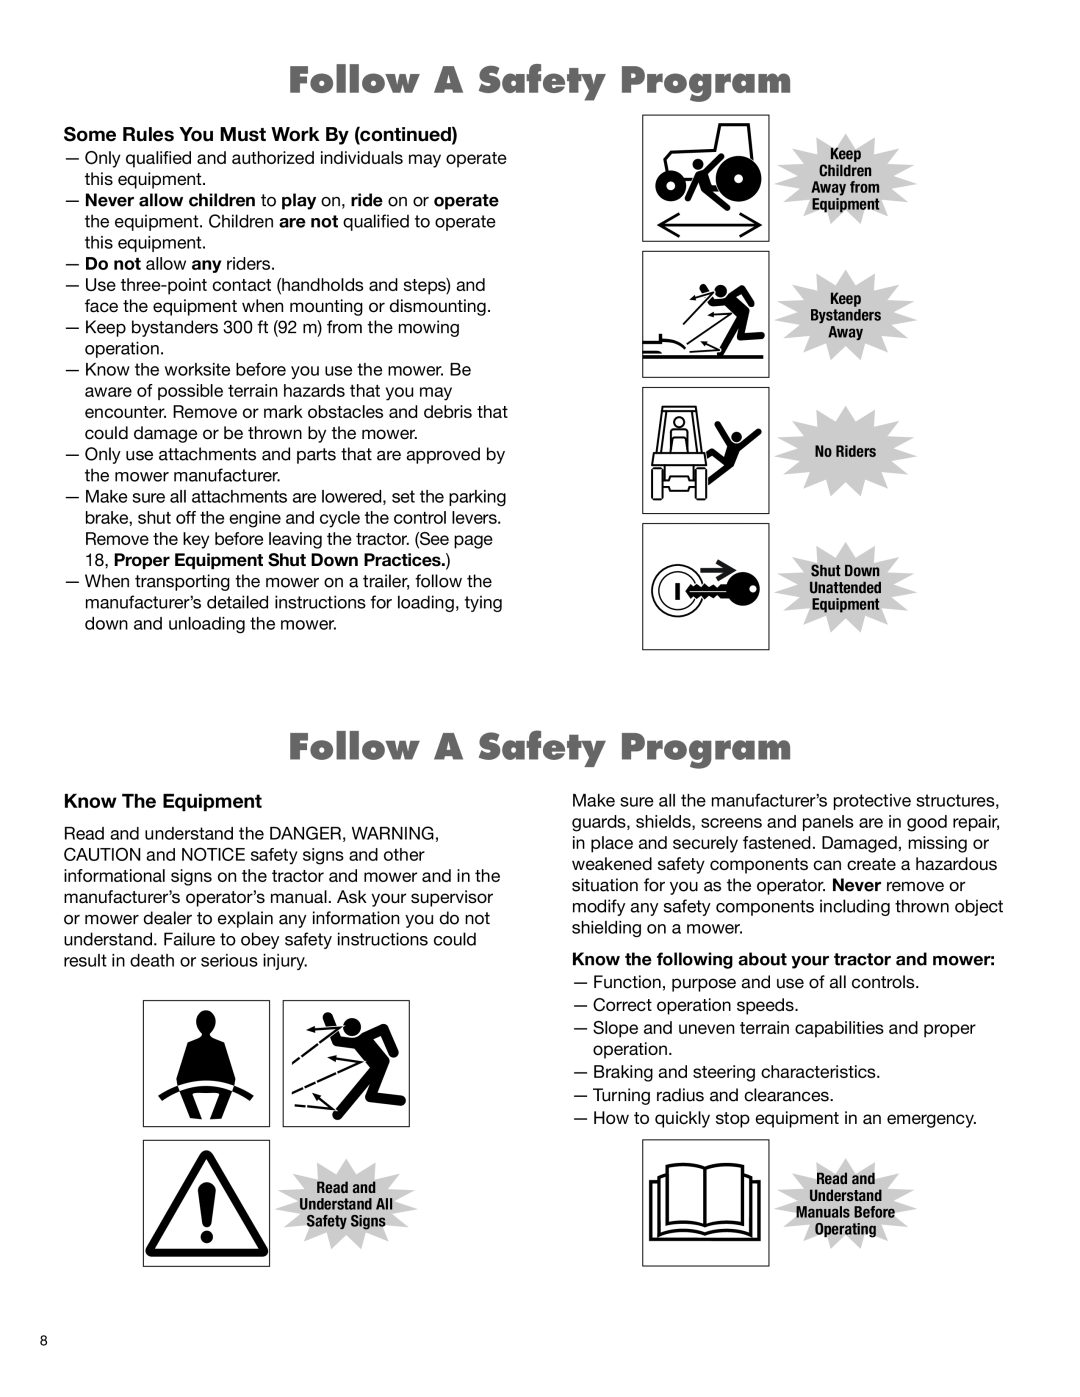 Alamo 1900 manual Follow A Safety Program, Some Rules You Must Work By continued, Know The Equipment 